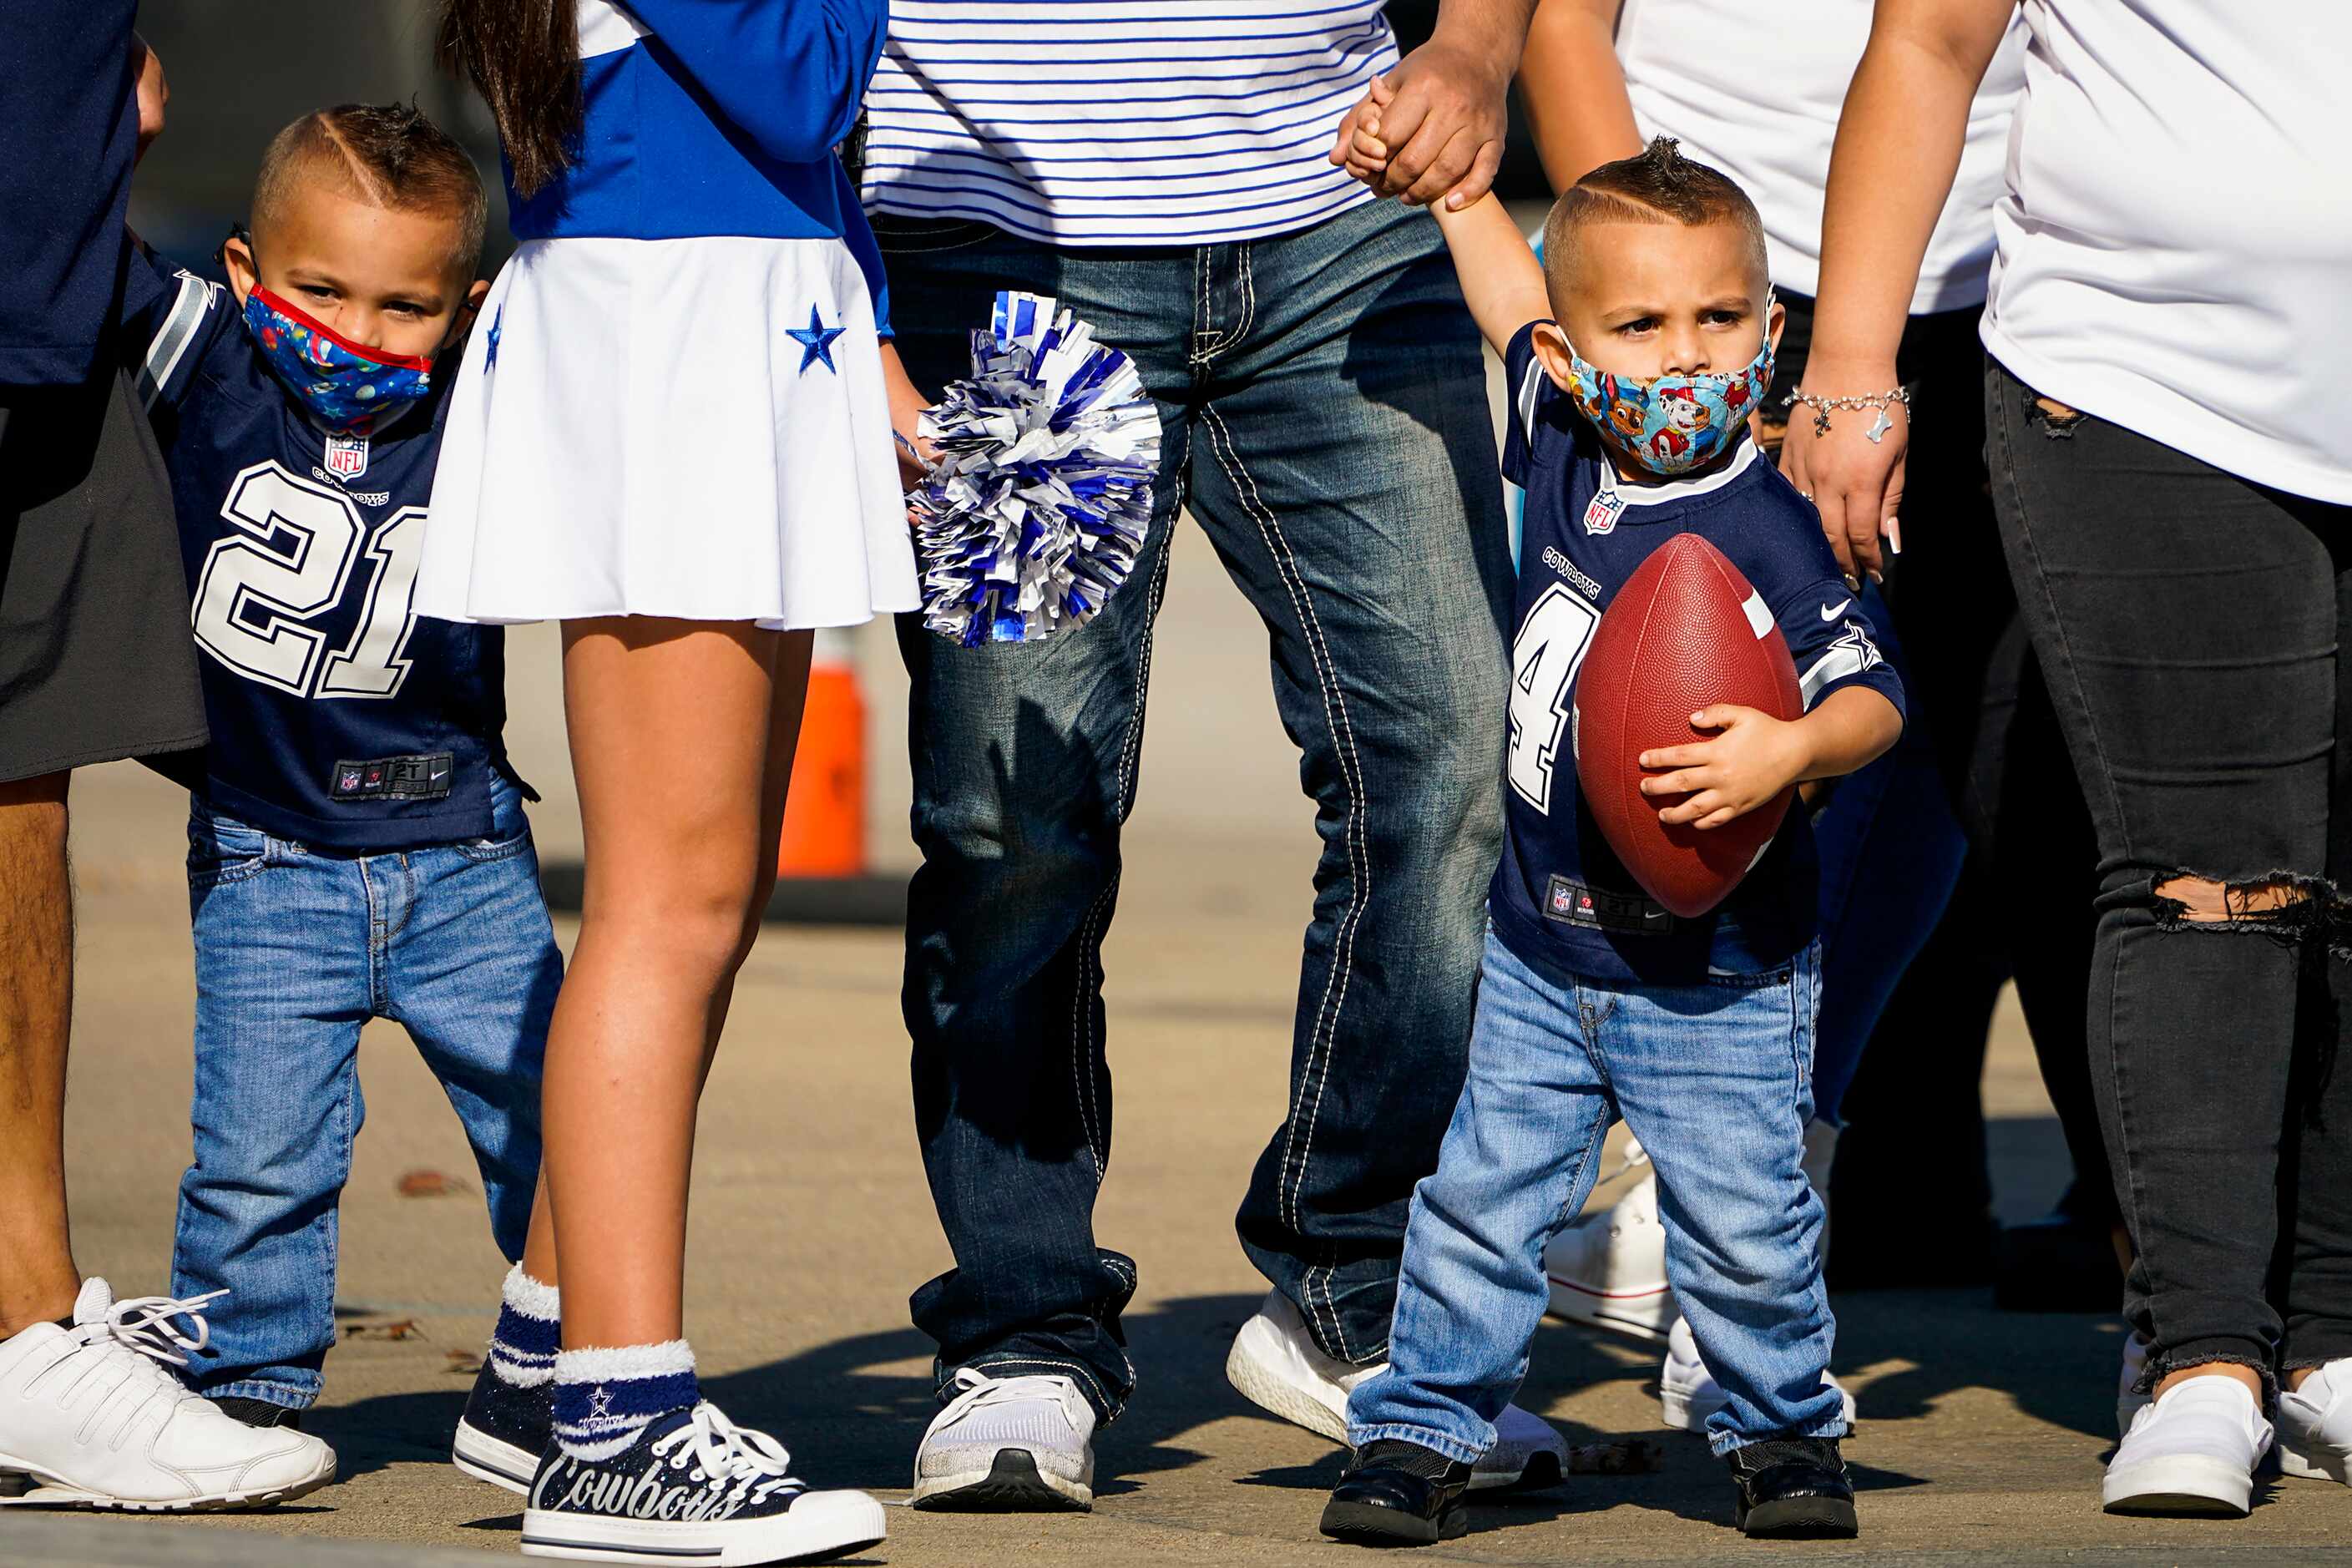 Jayce Sartuche, 3, from Victoria, Texas, clutches a football as he heads into the stadium...